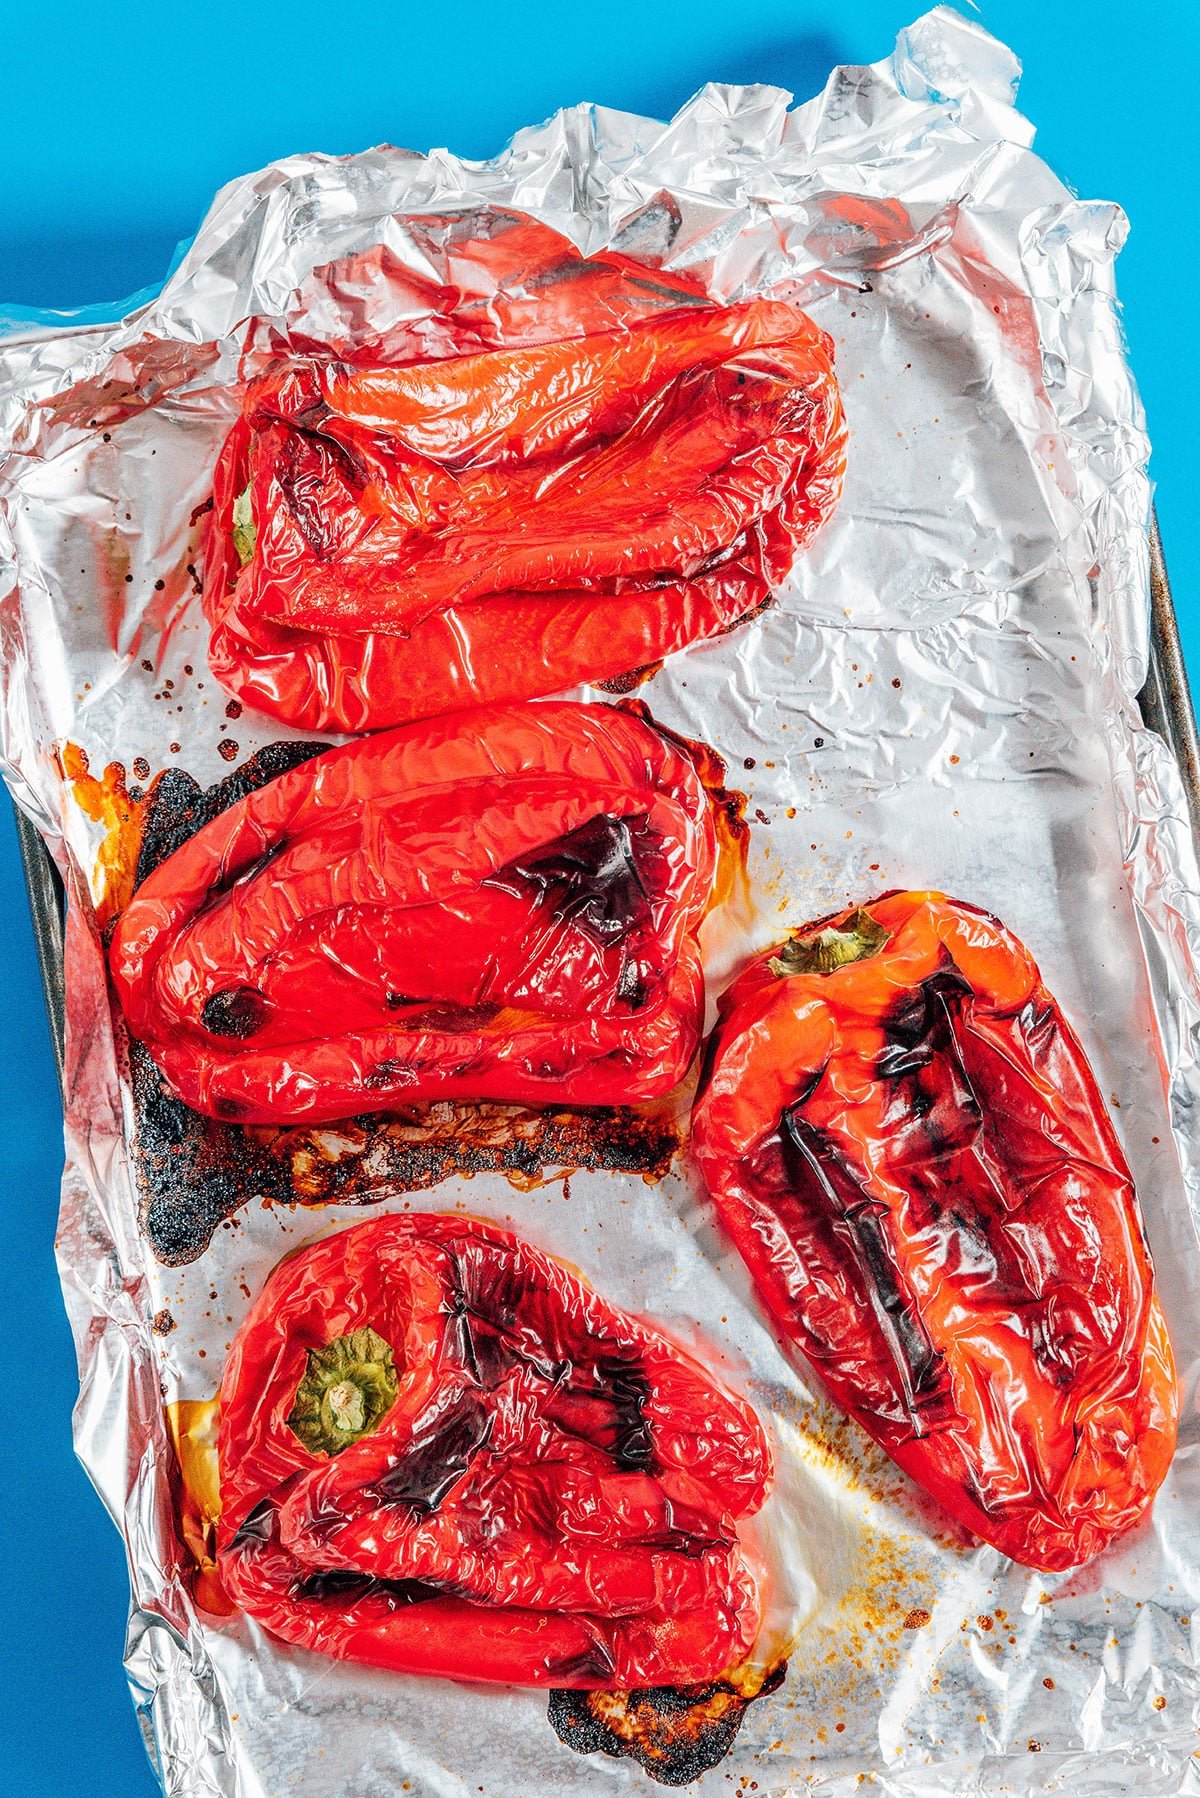 Roasted peppers on a sheet pan.